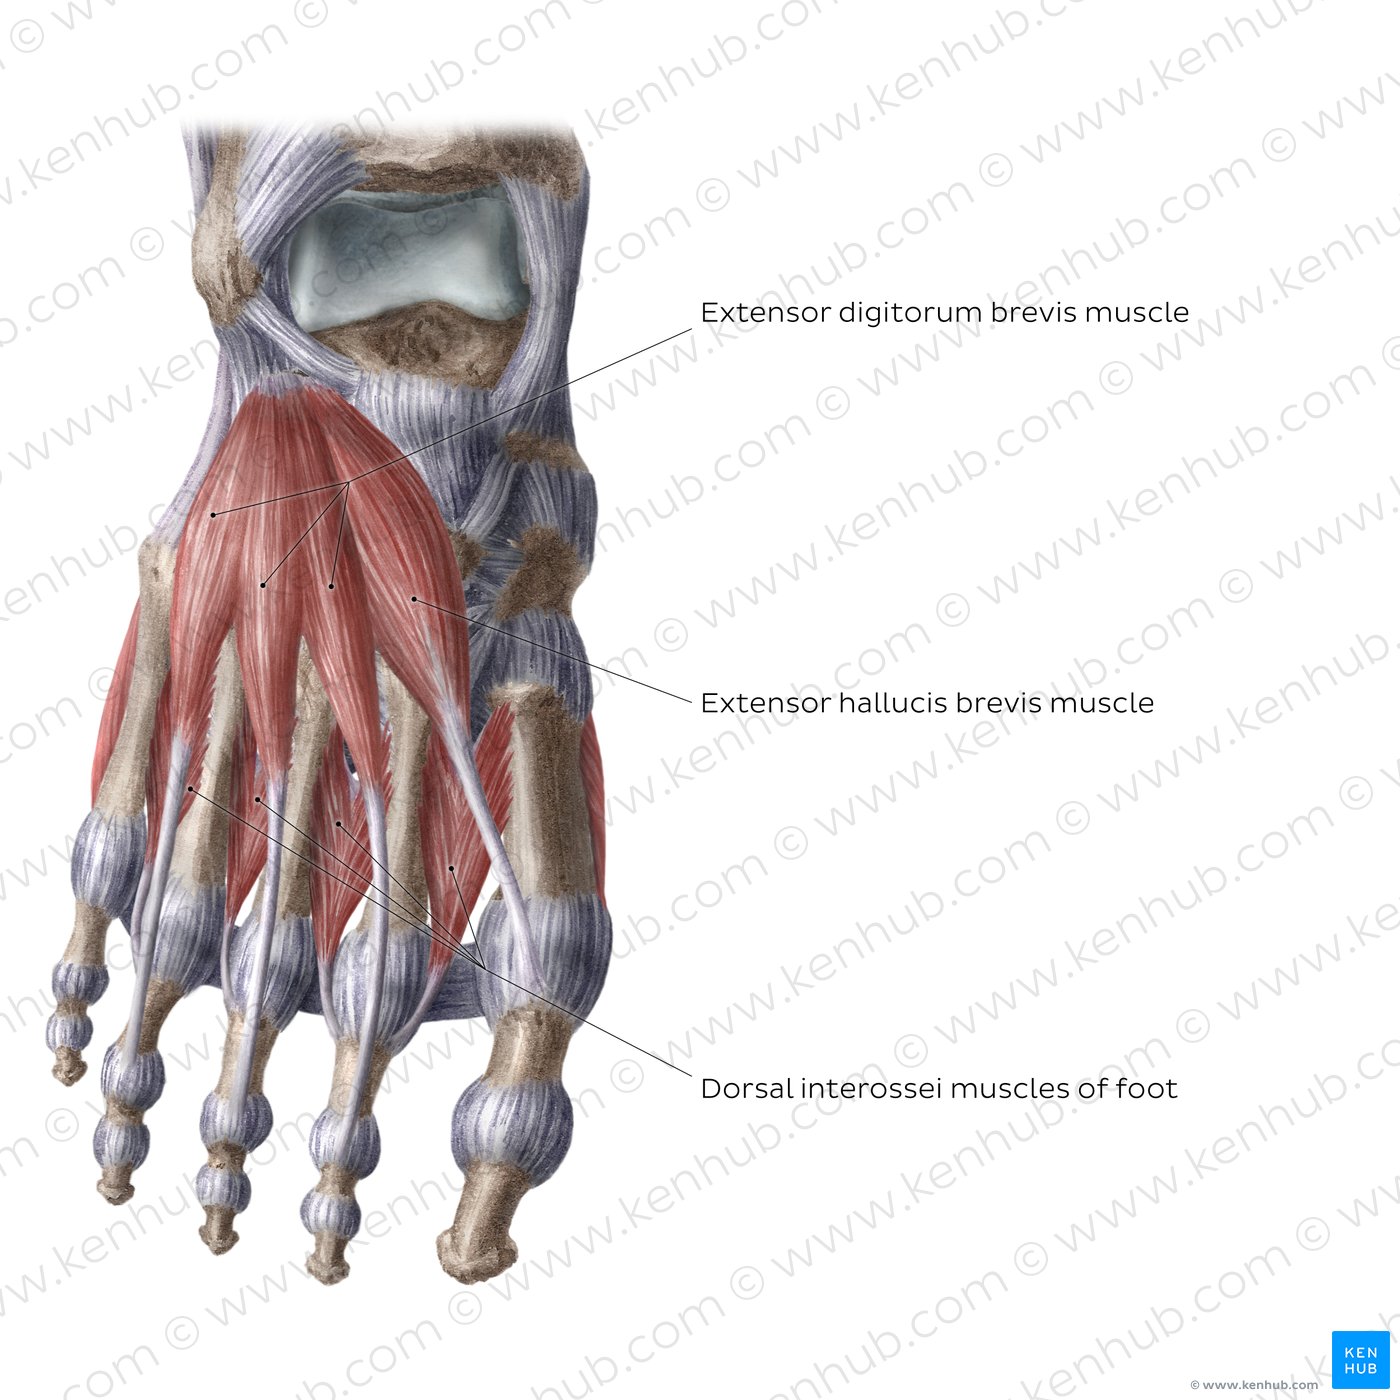 Dorsal muscles of the foot